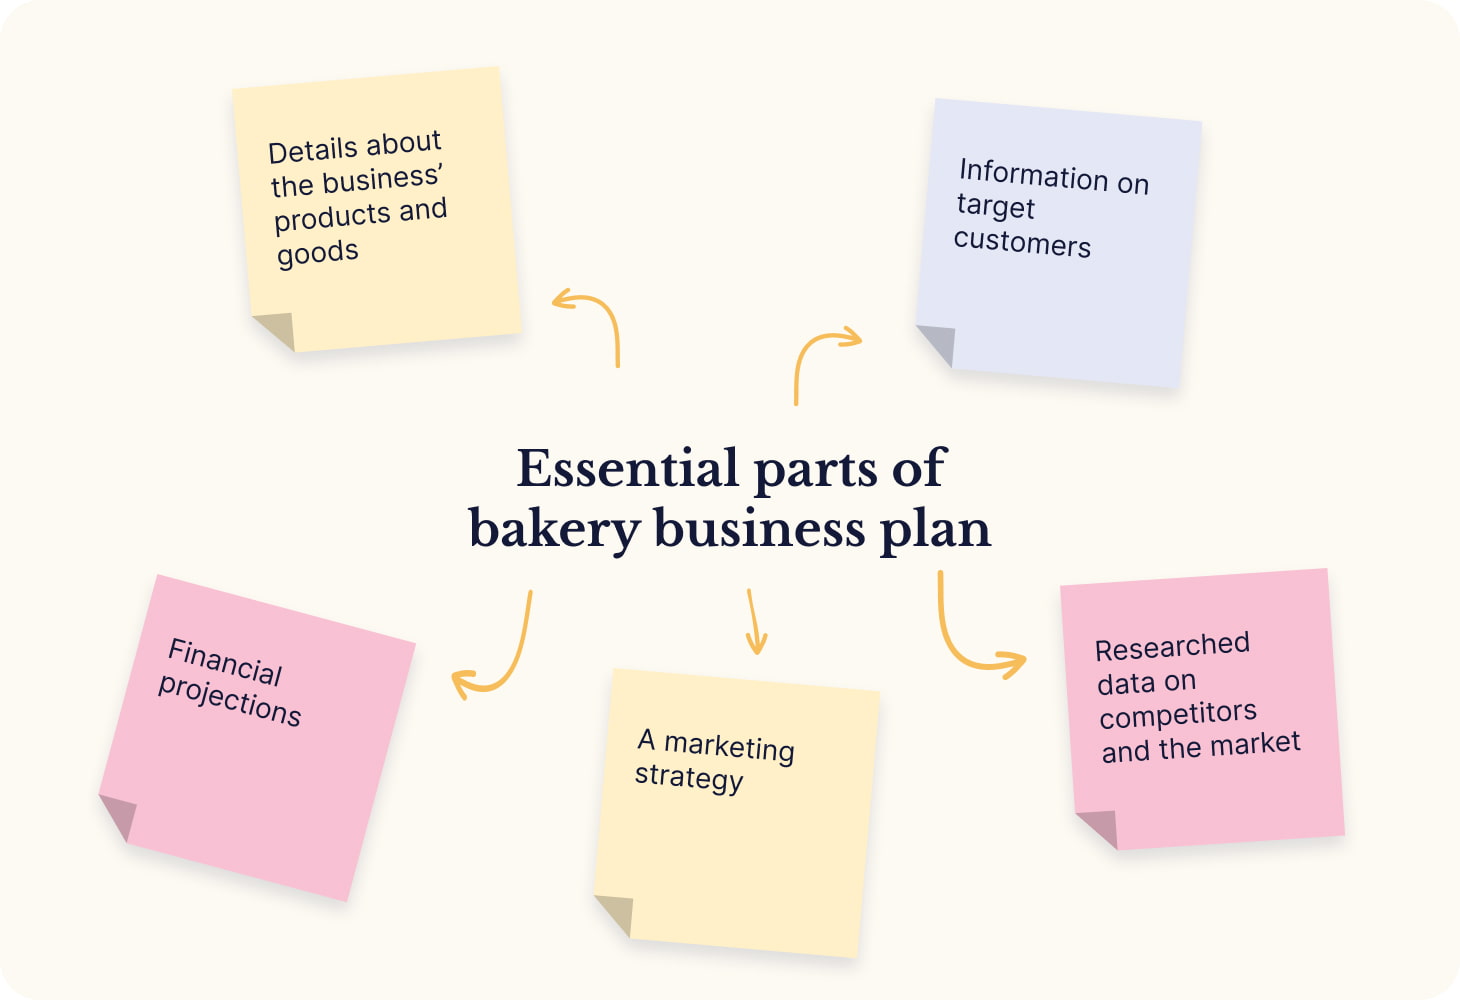 Essential parts of bakery business plan